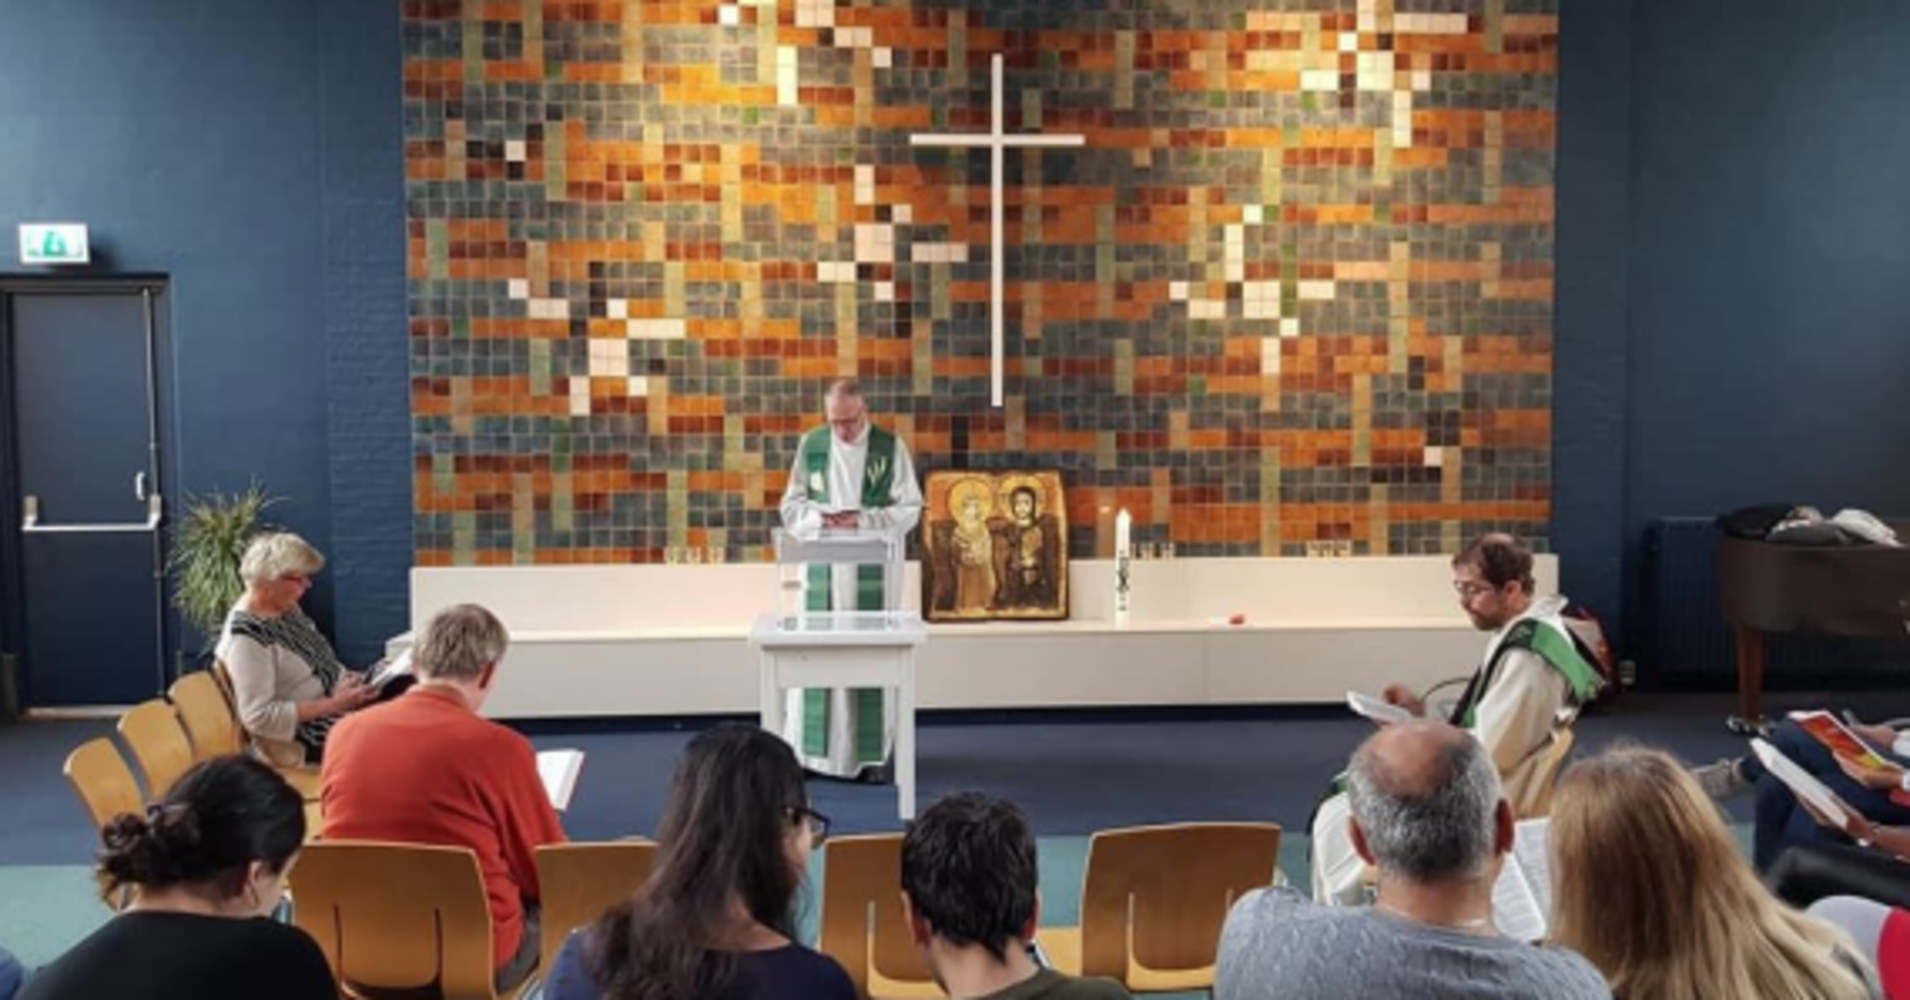 Church Holds Continuous Worship Service To Prevent Family's Deportation